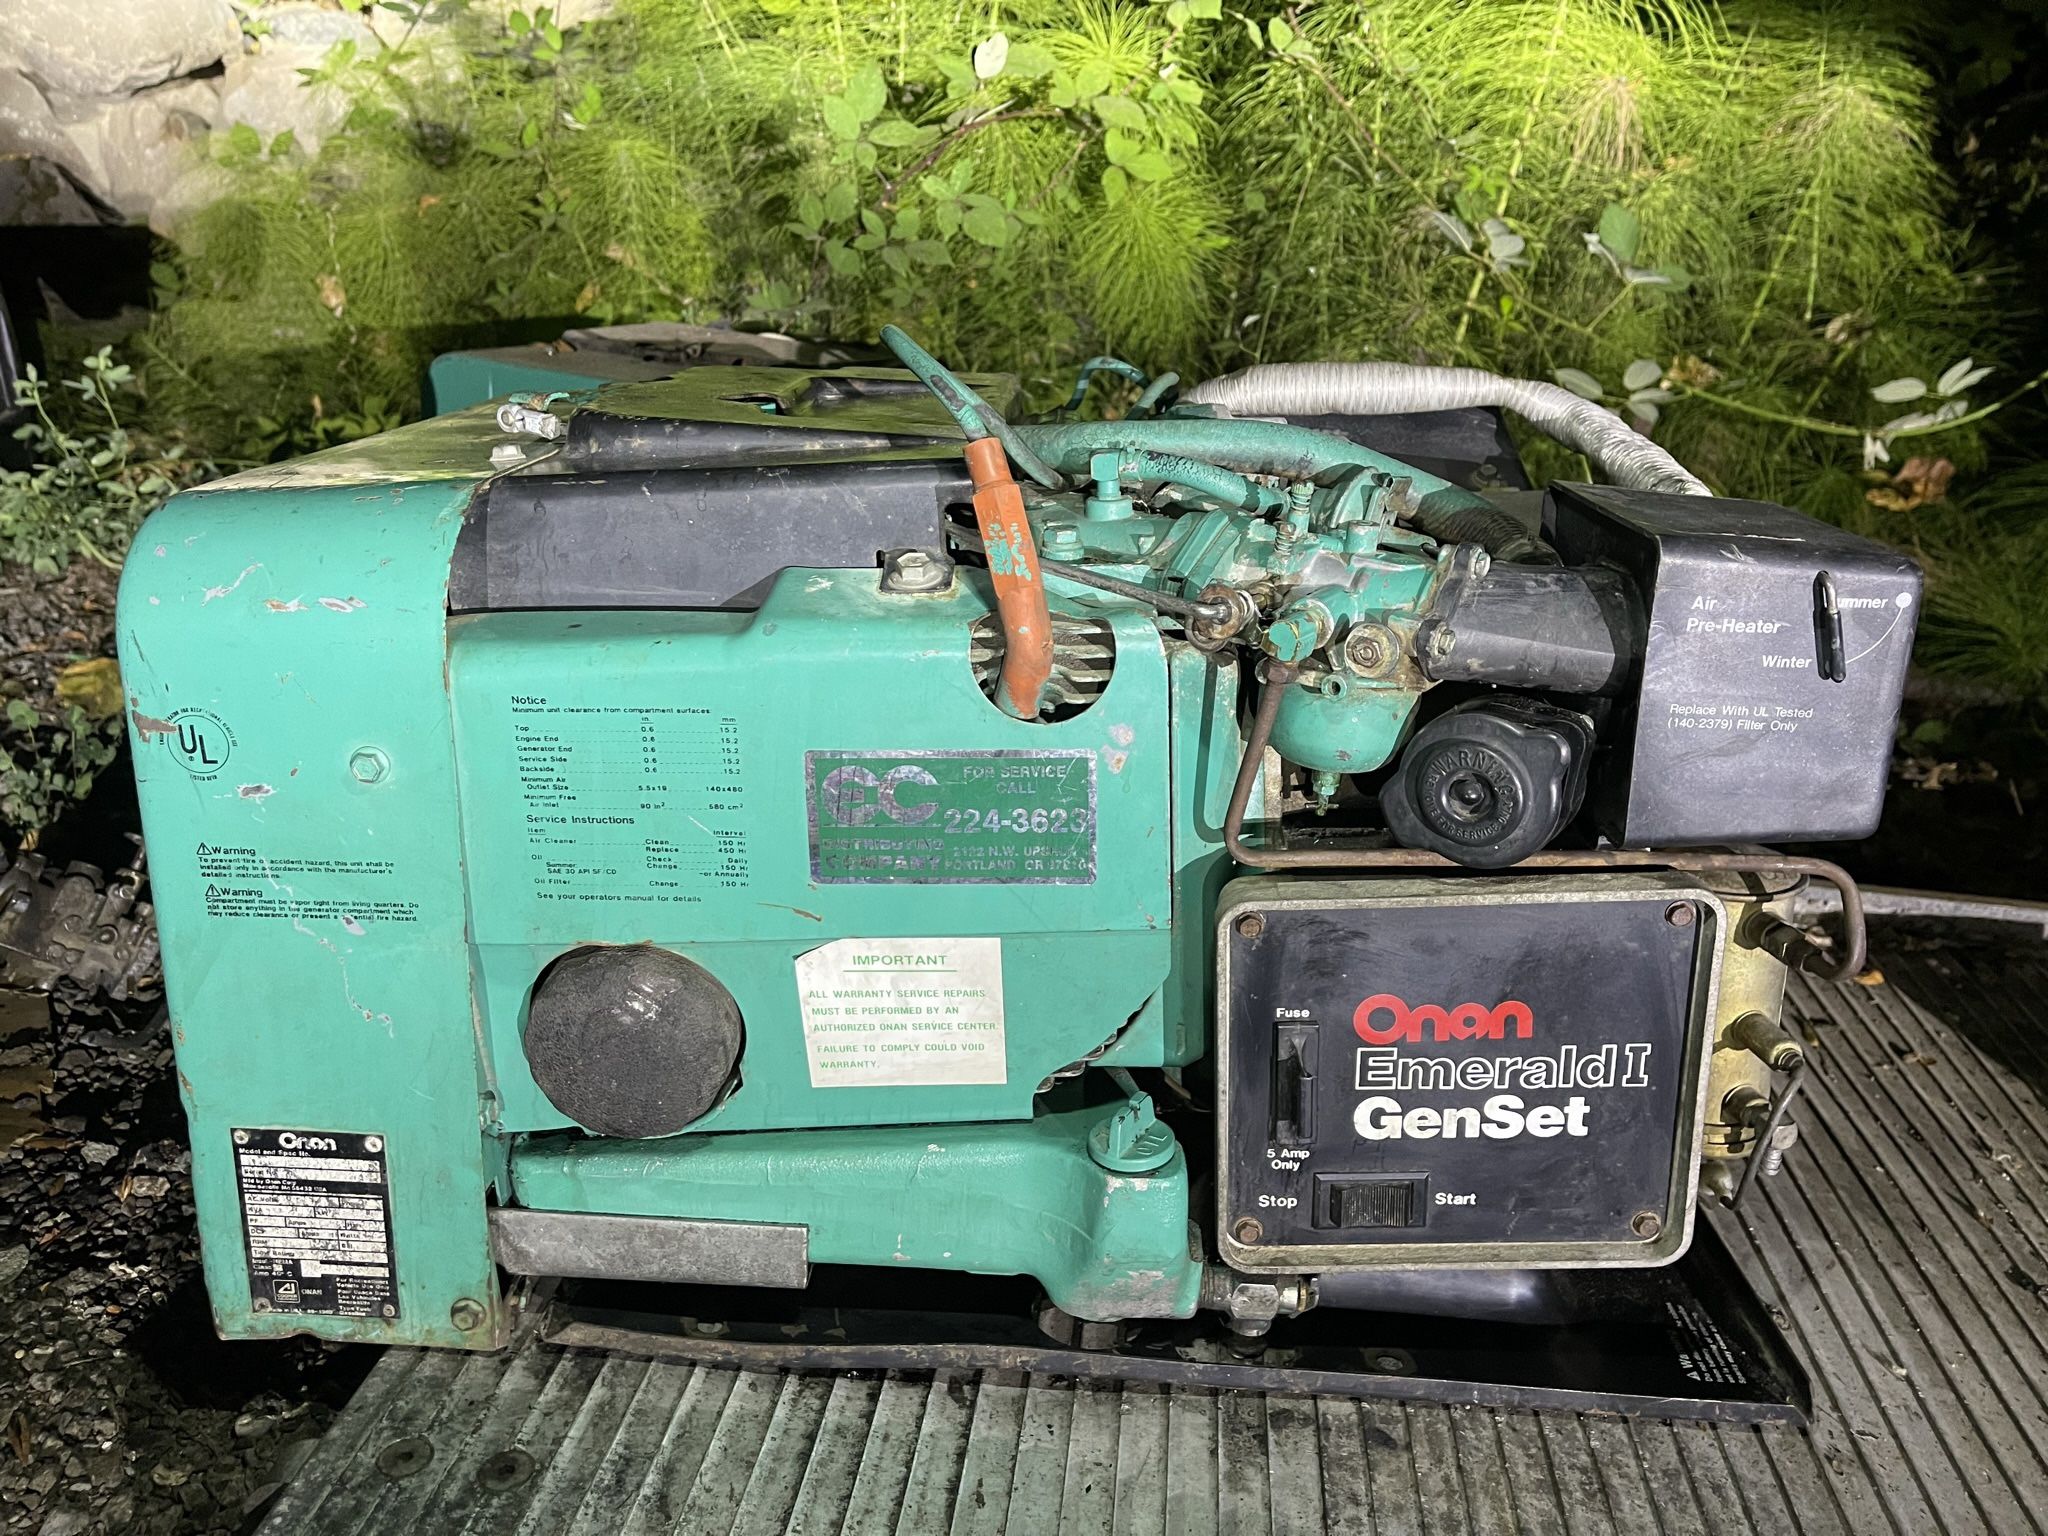 Onan Emerald 1 Gen Set 4000 generator in Great running condition , starts and running, no problems. Has wires